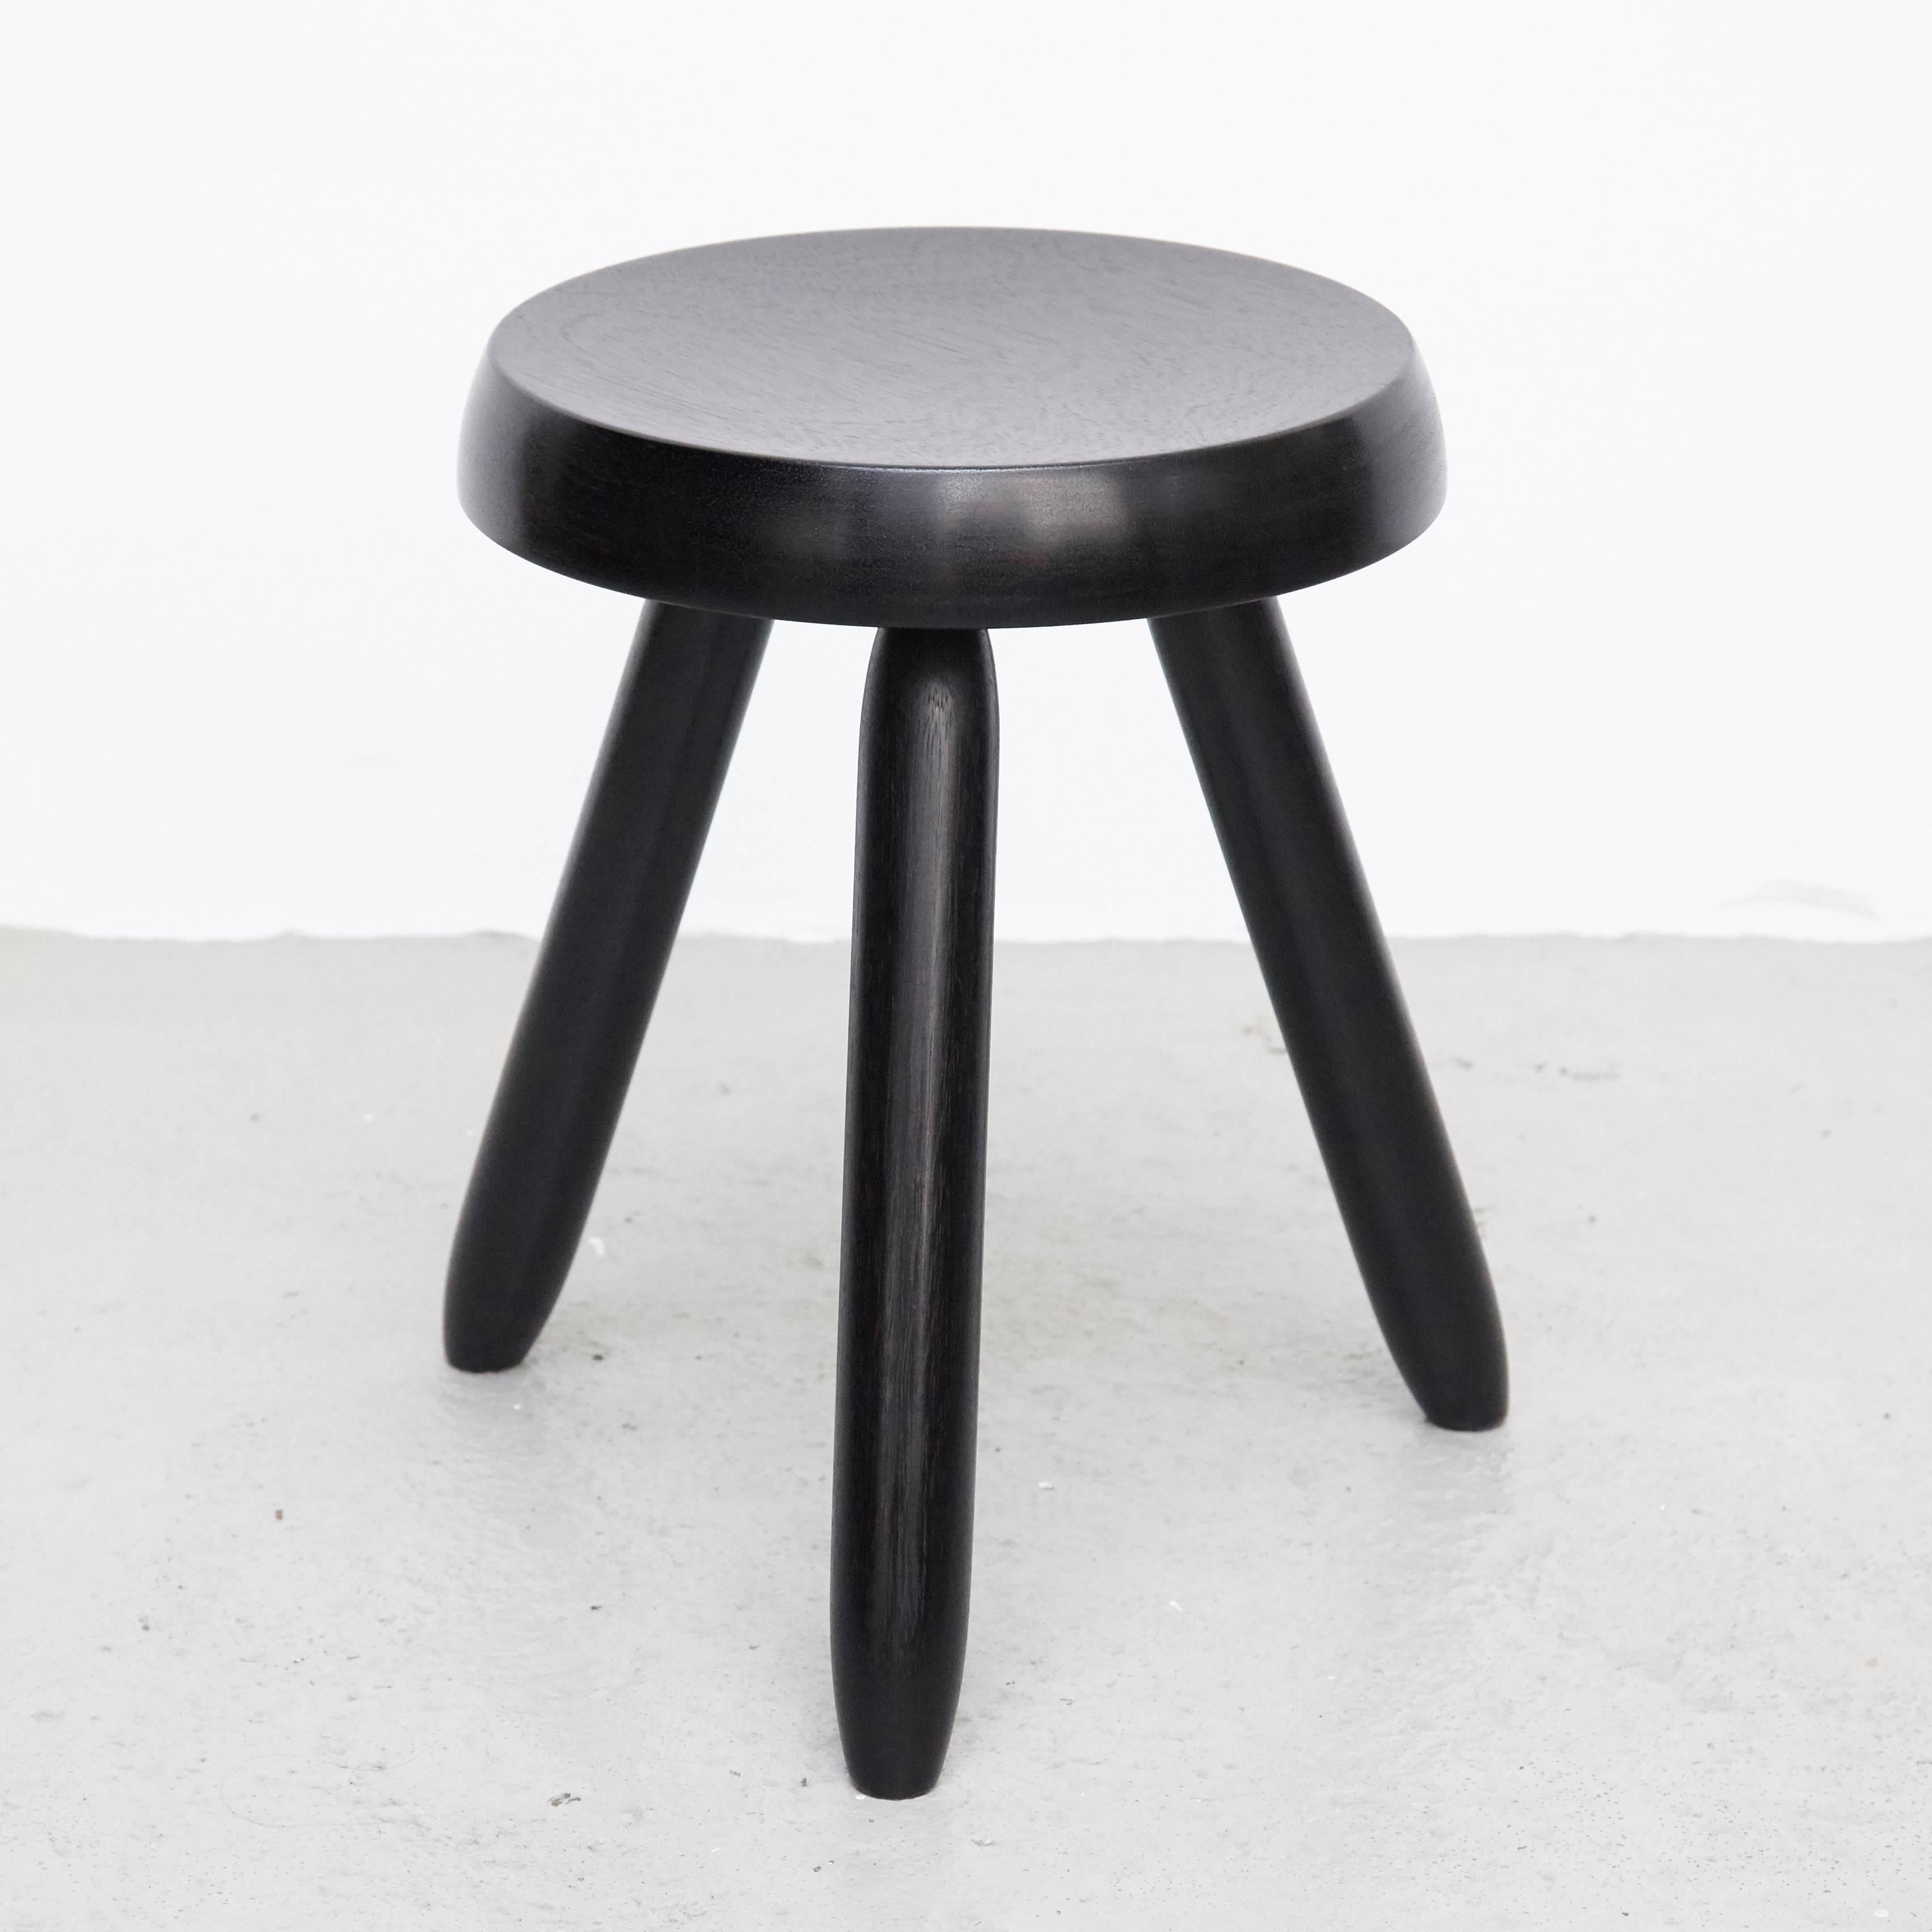 Set of Three Stools in the Style of Charlotte Perriand 1